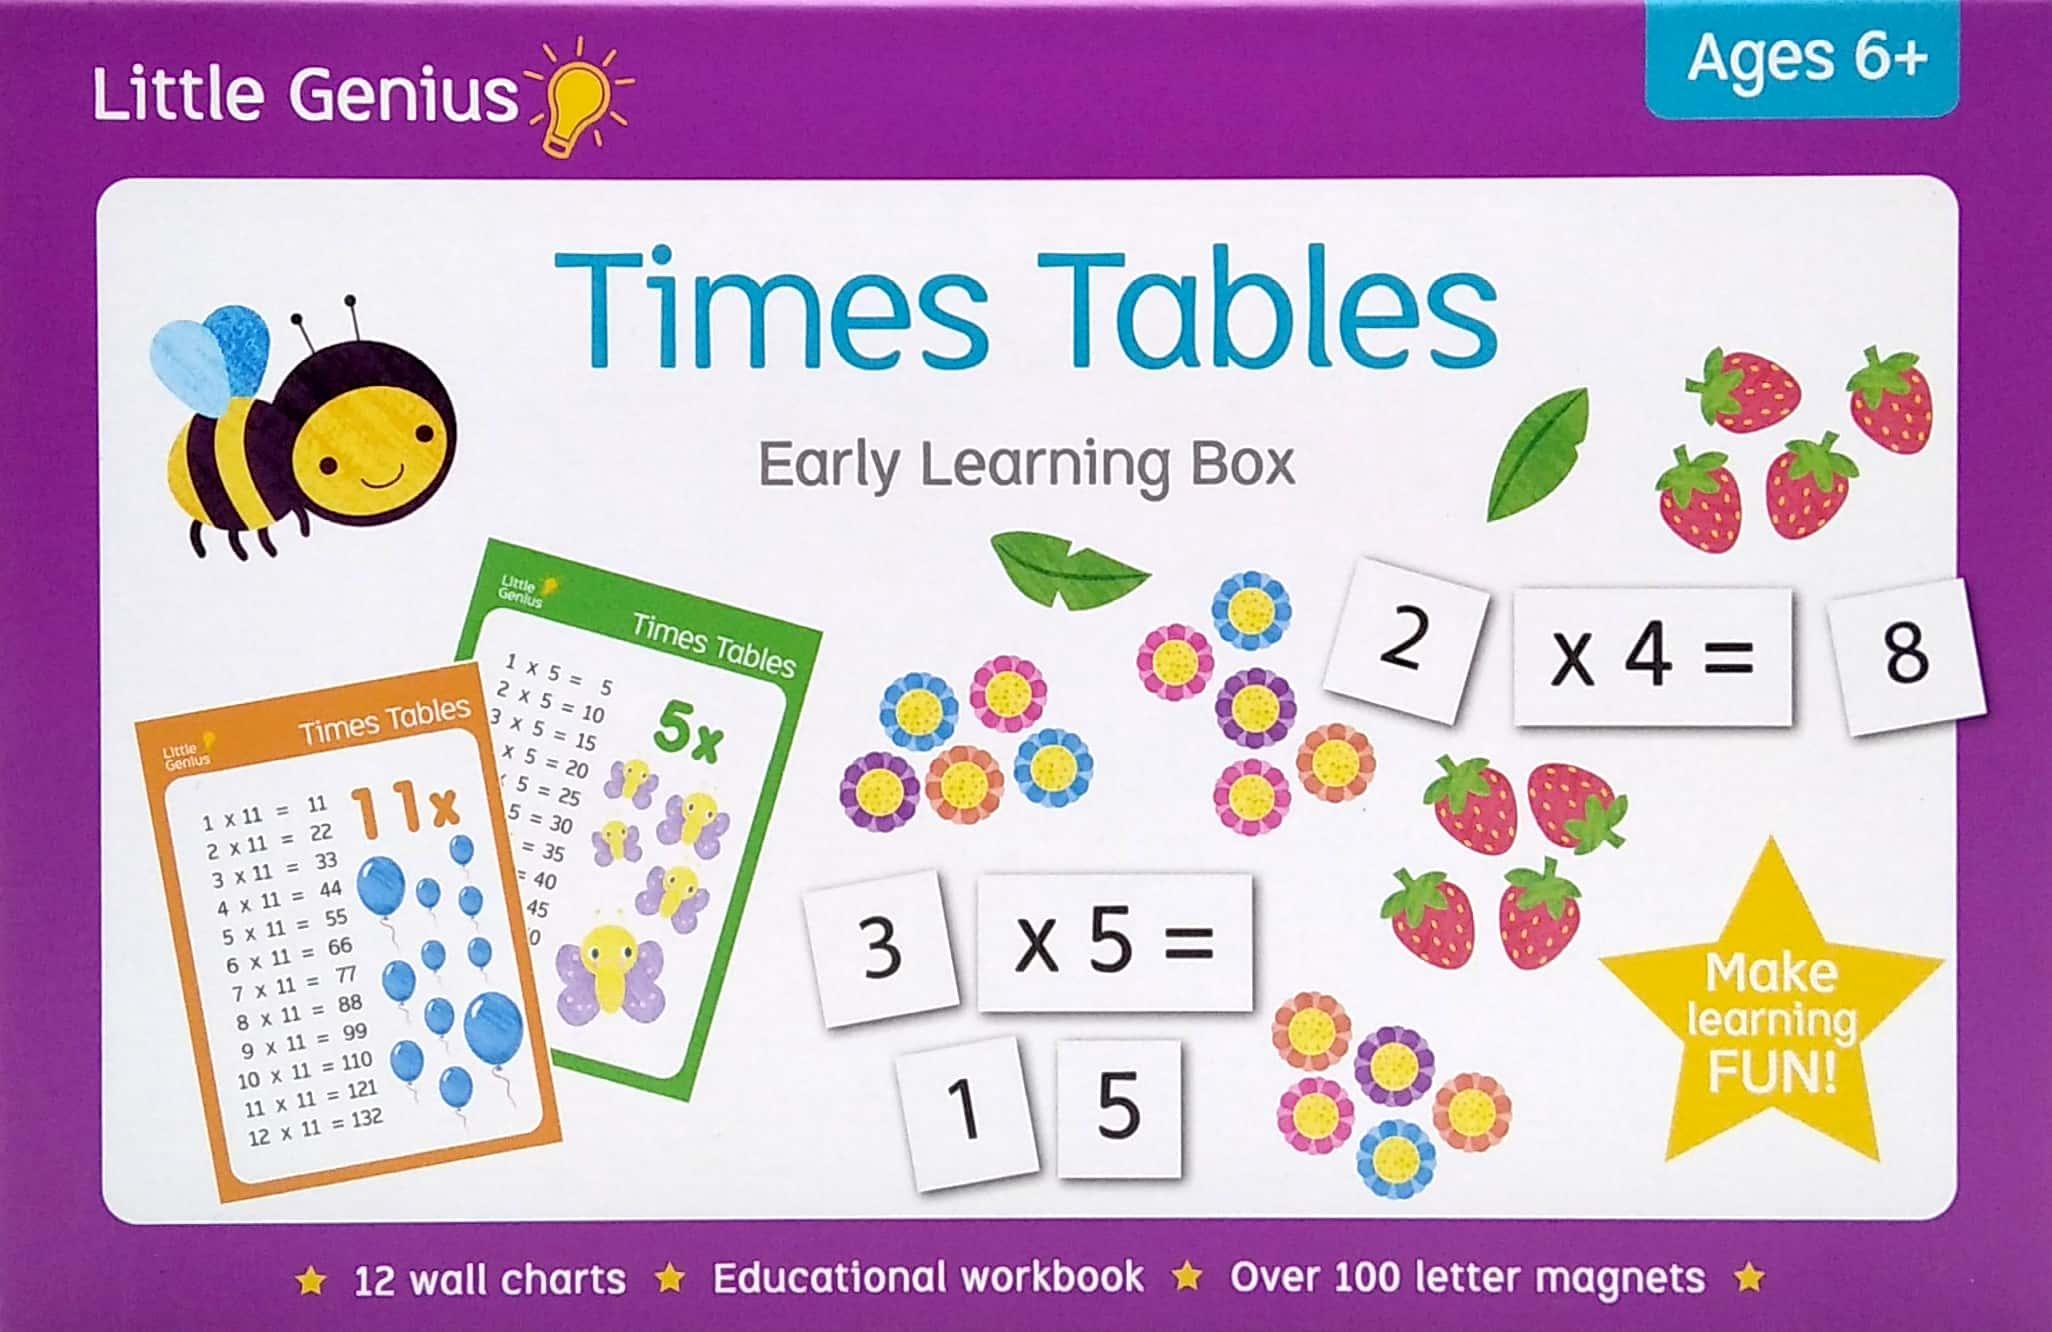 Little Genius : Times Tables Early Learning Box